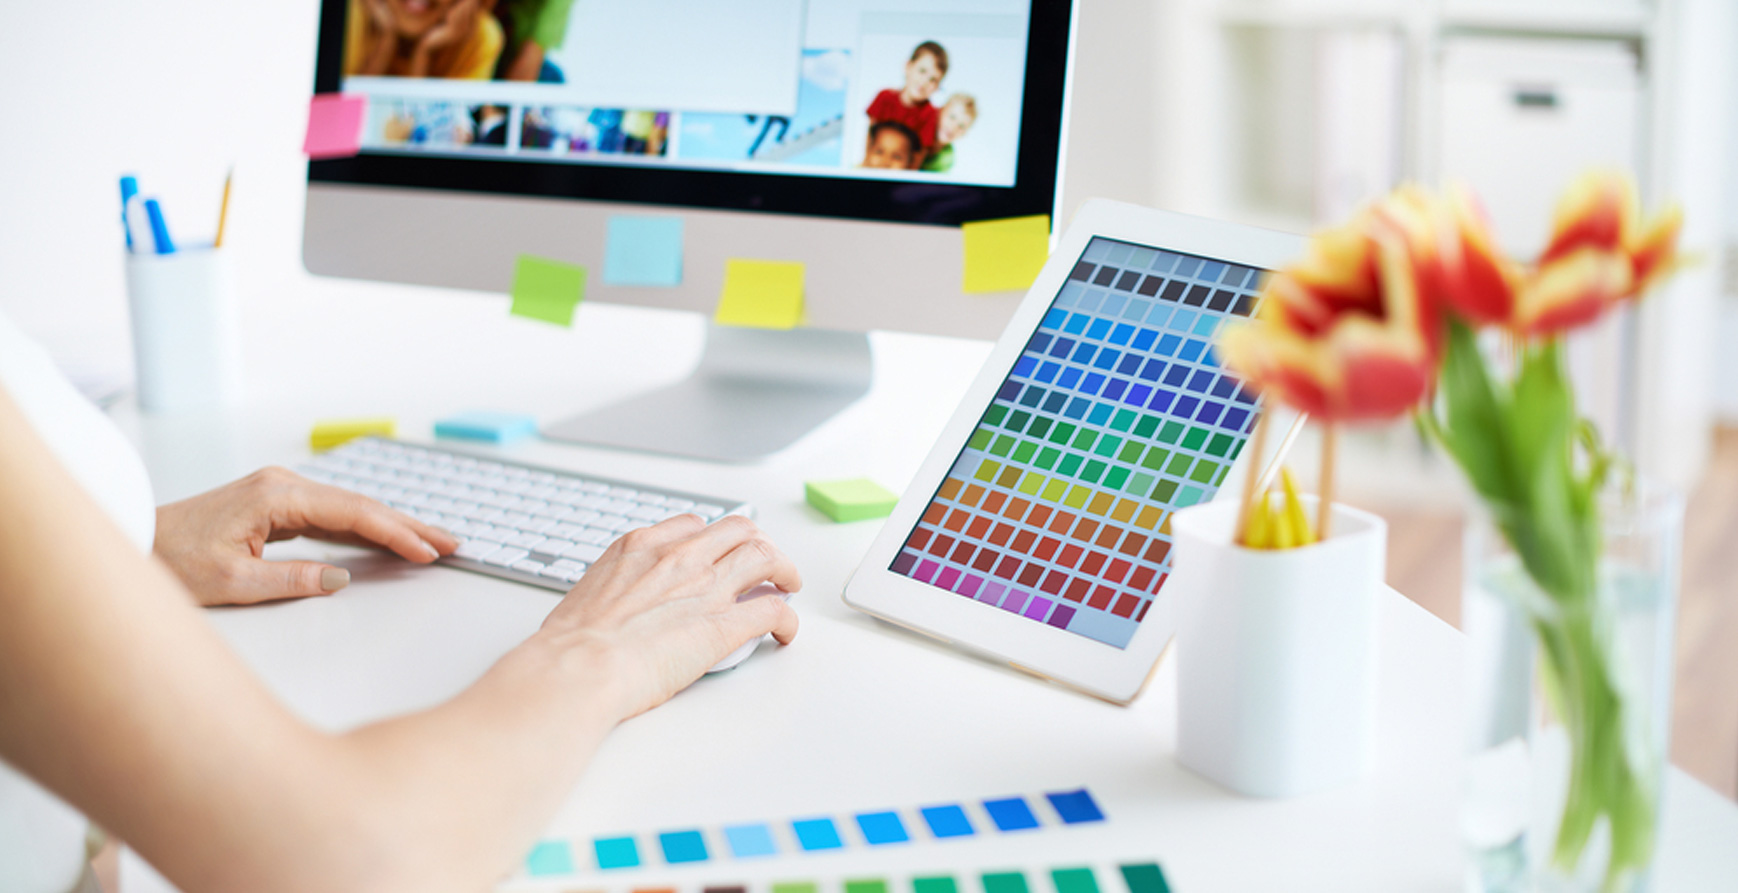 If your website does not work, you may need a web designer Birmingham